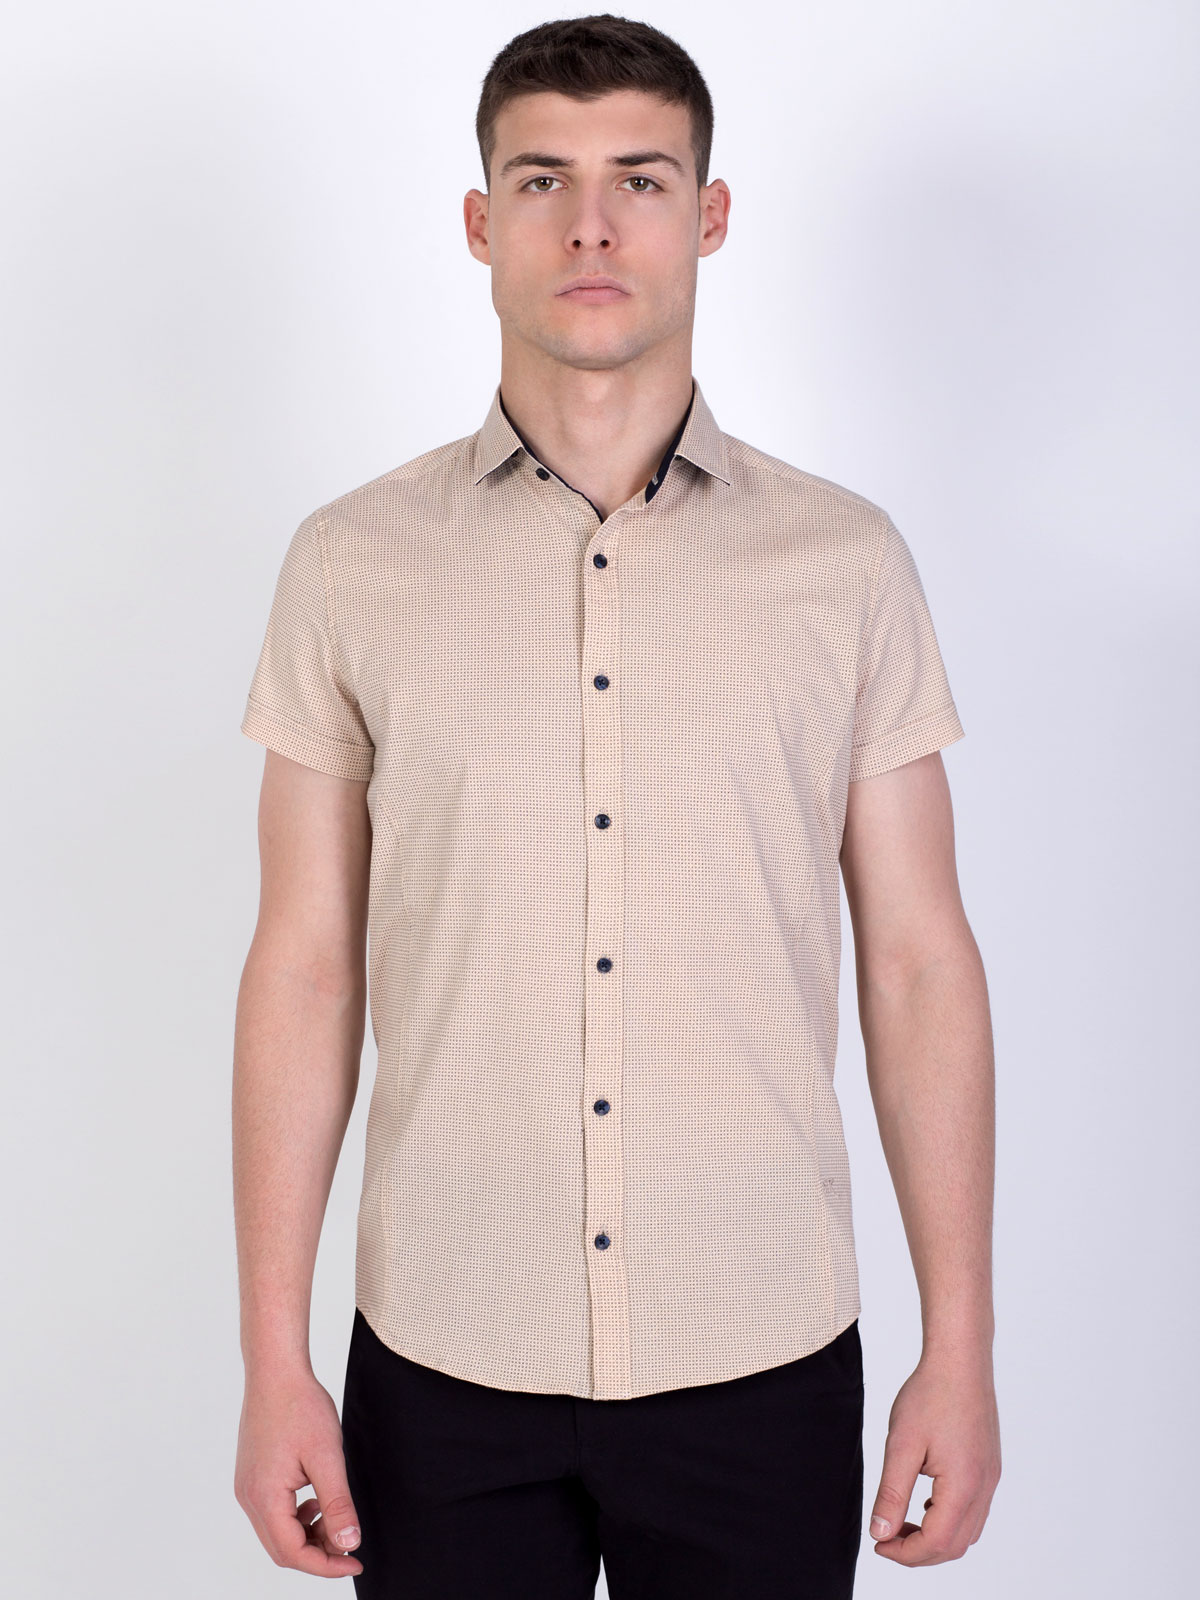 Fitted ecru shirt for small figures - 80202 € 11.25 img4